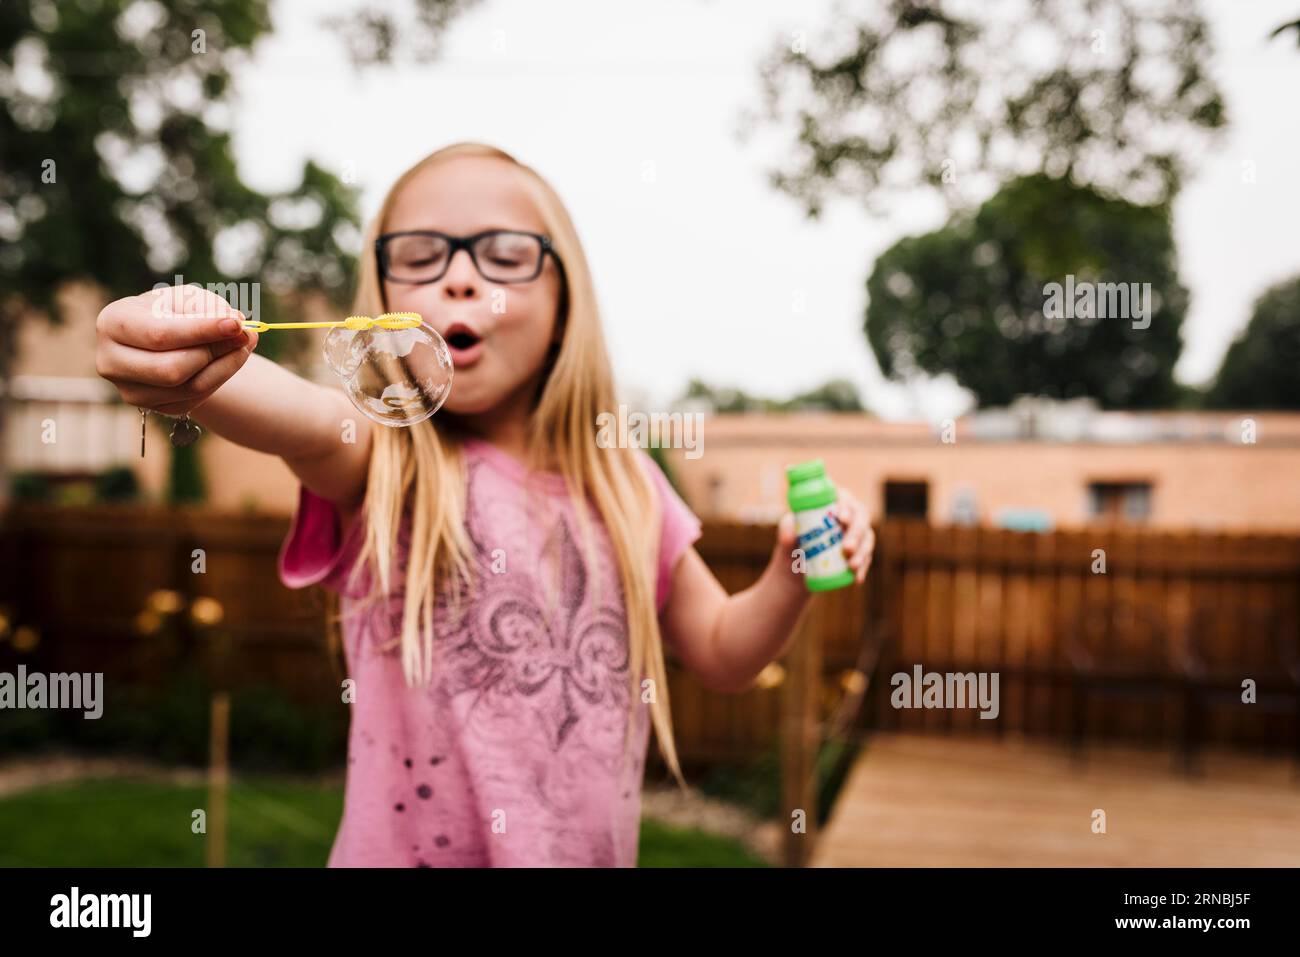 Little girl with glasses blows bubbles in North Dakota backyard summer Stock Photo